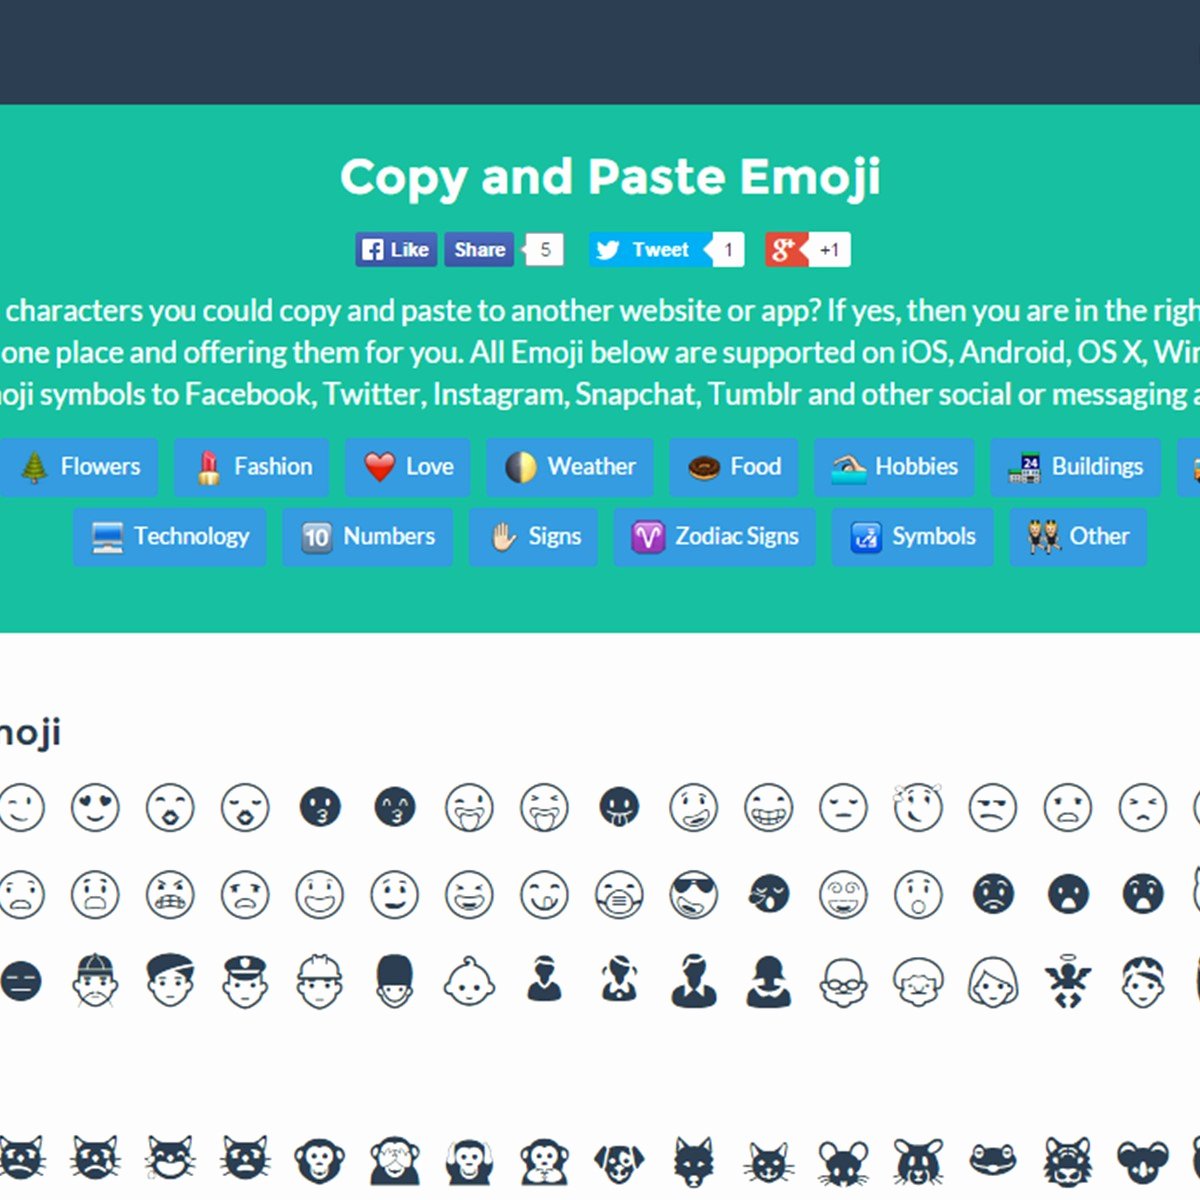 Free Emoji Copy and Paste Luxury Free Copy and Paste Emoji Alternatives Alternativeto